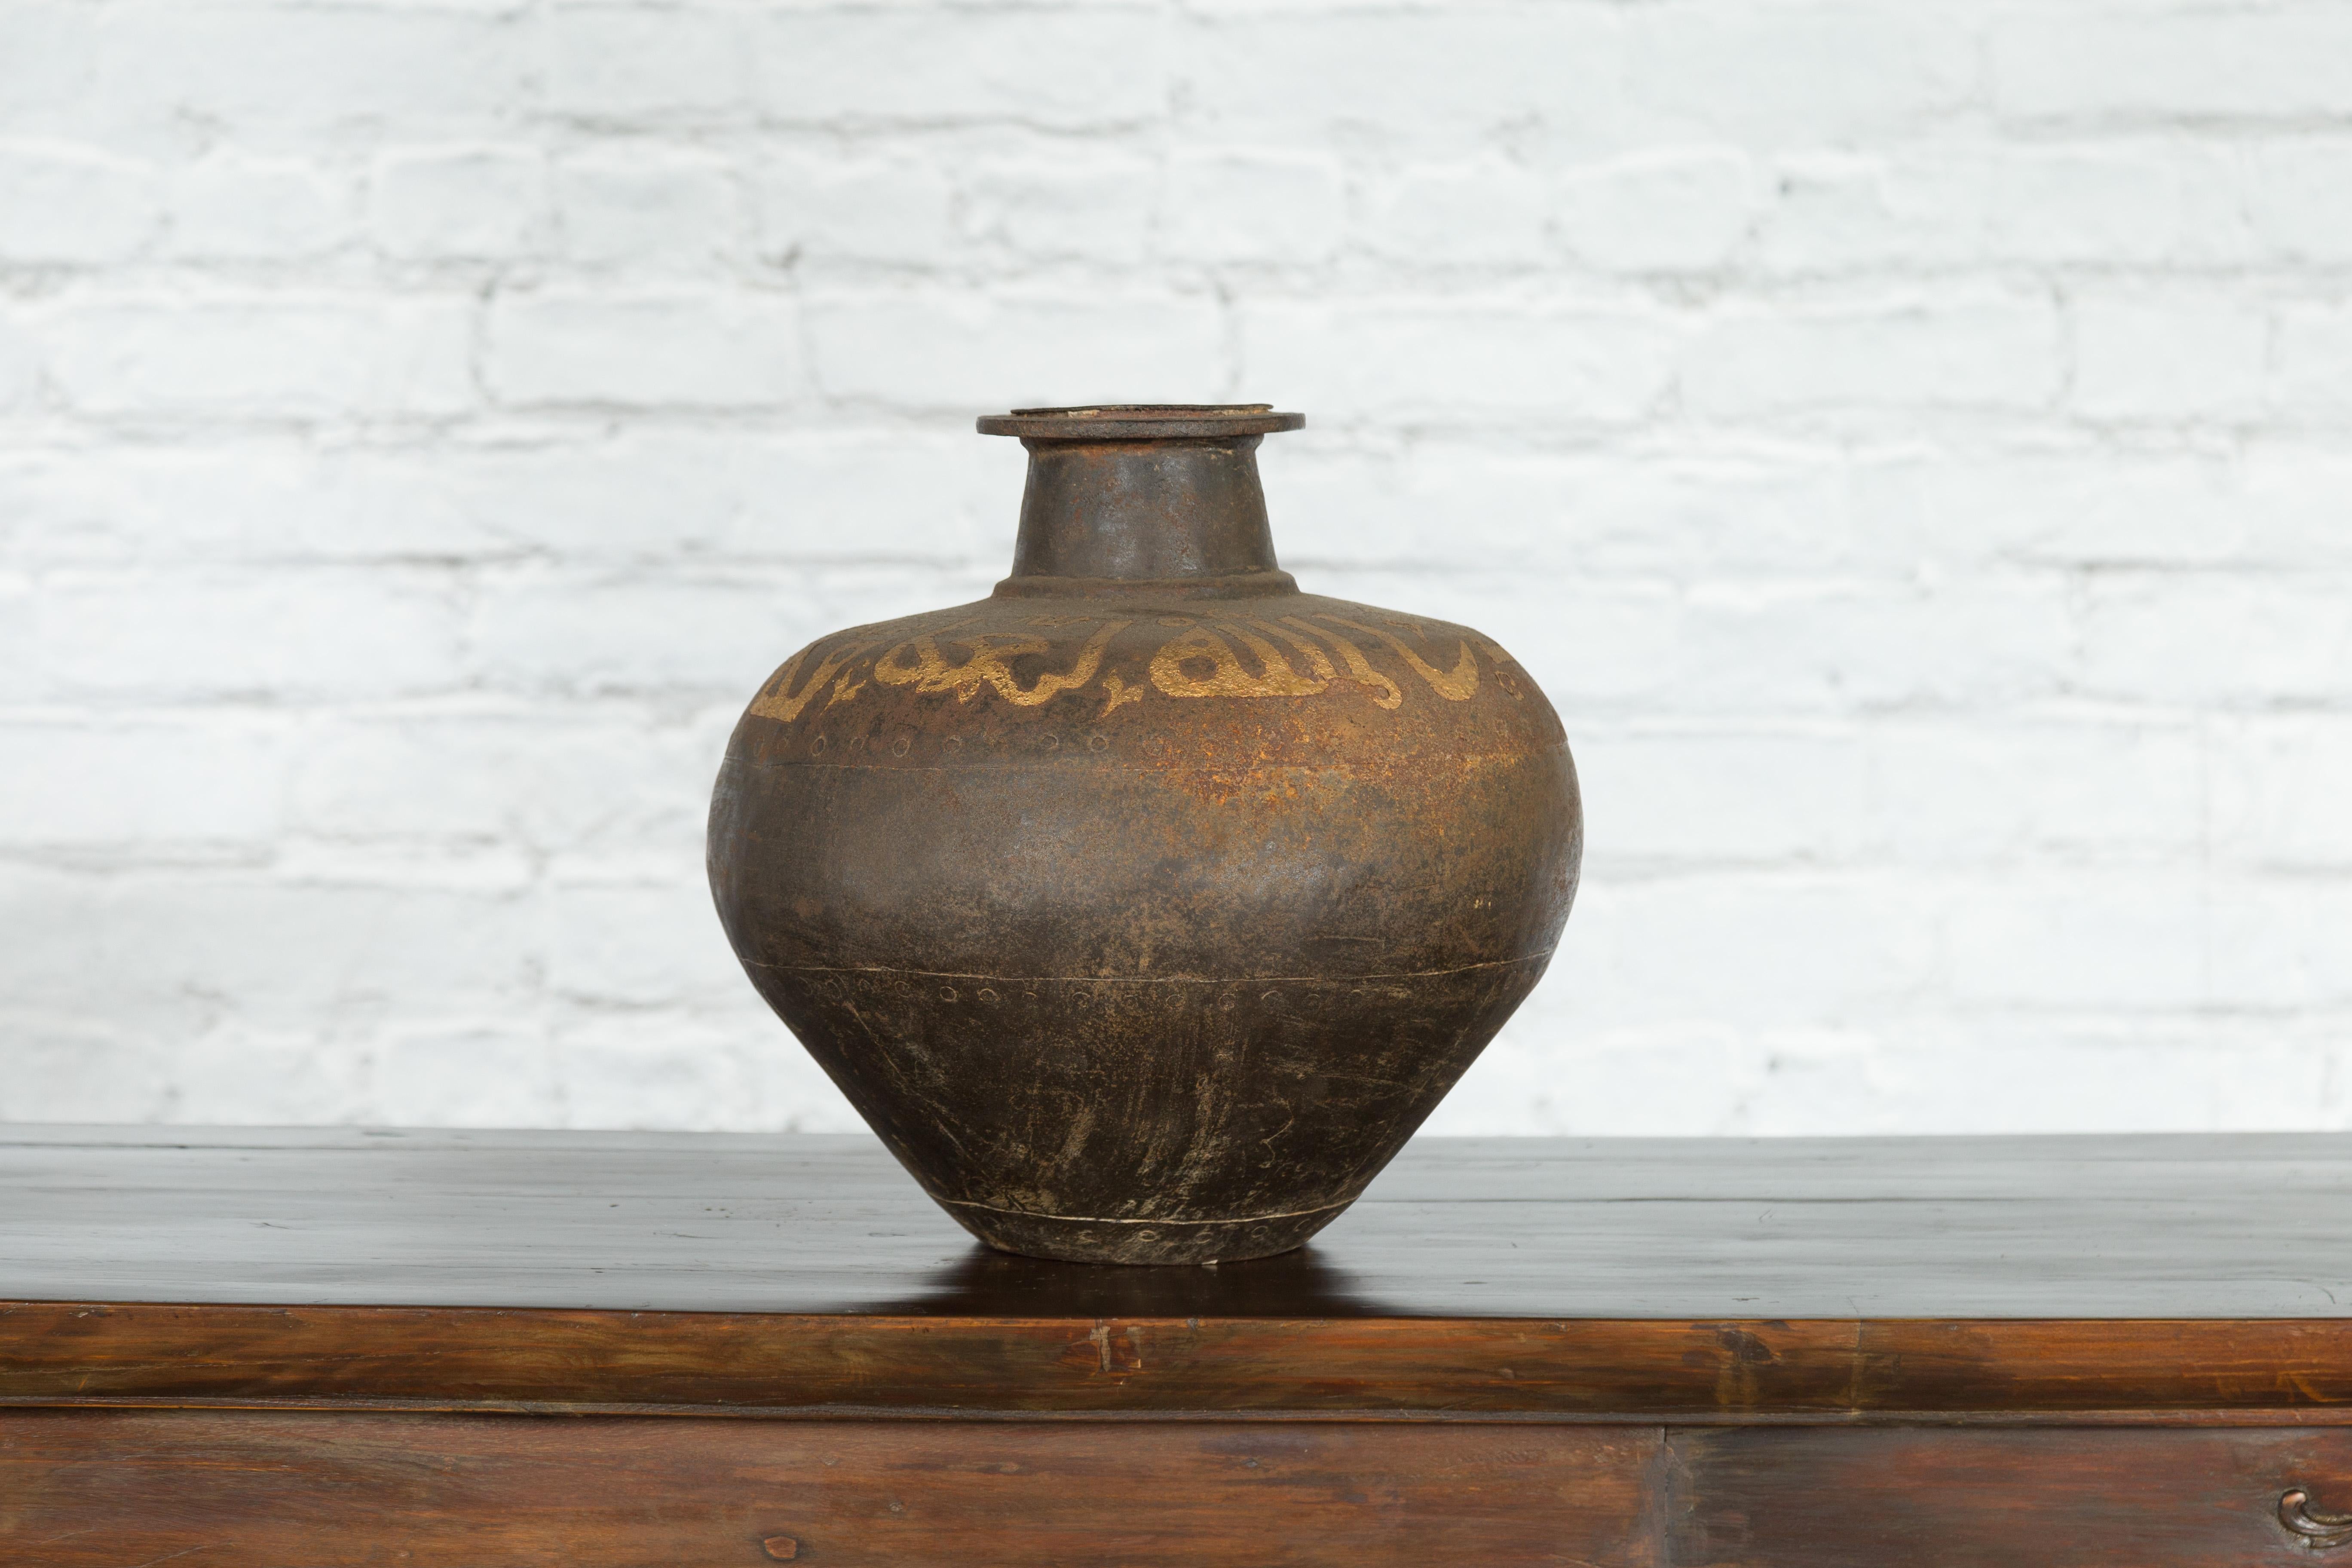 A vintage Indian vase from the mid-20th century, with gilded calligraphy and distressed appearance. Created in India during the midcentury period, this rustic vase attracts our attention with its tapered lines and weathered patina. A narrow neck